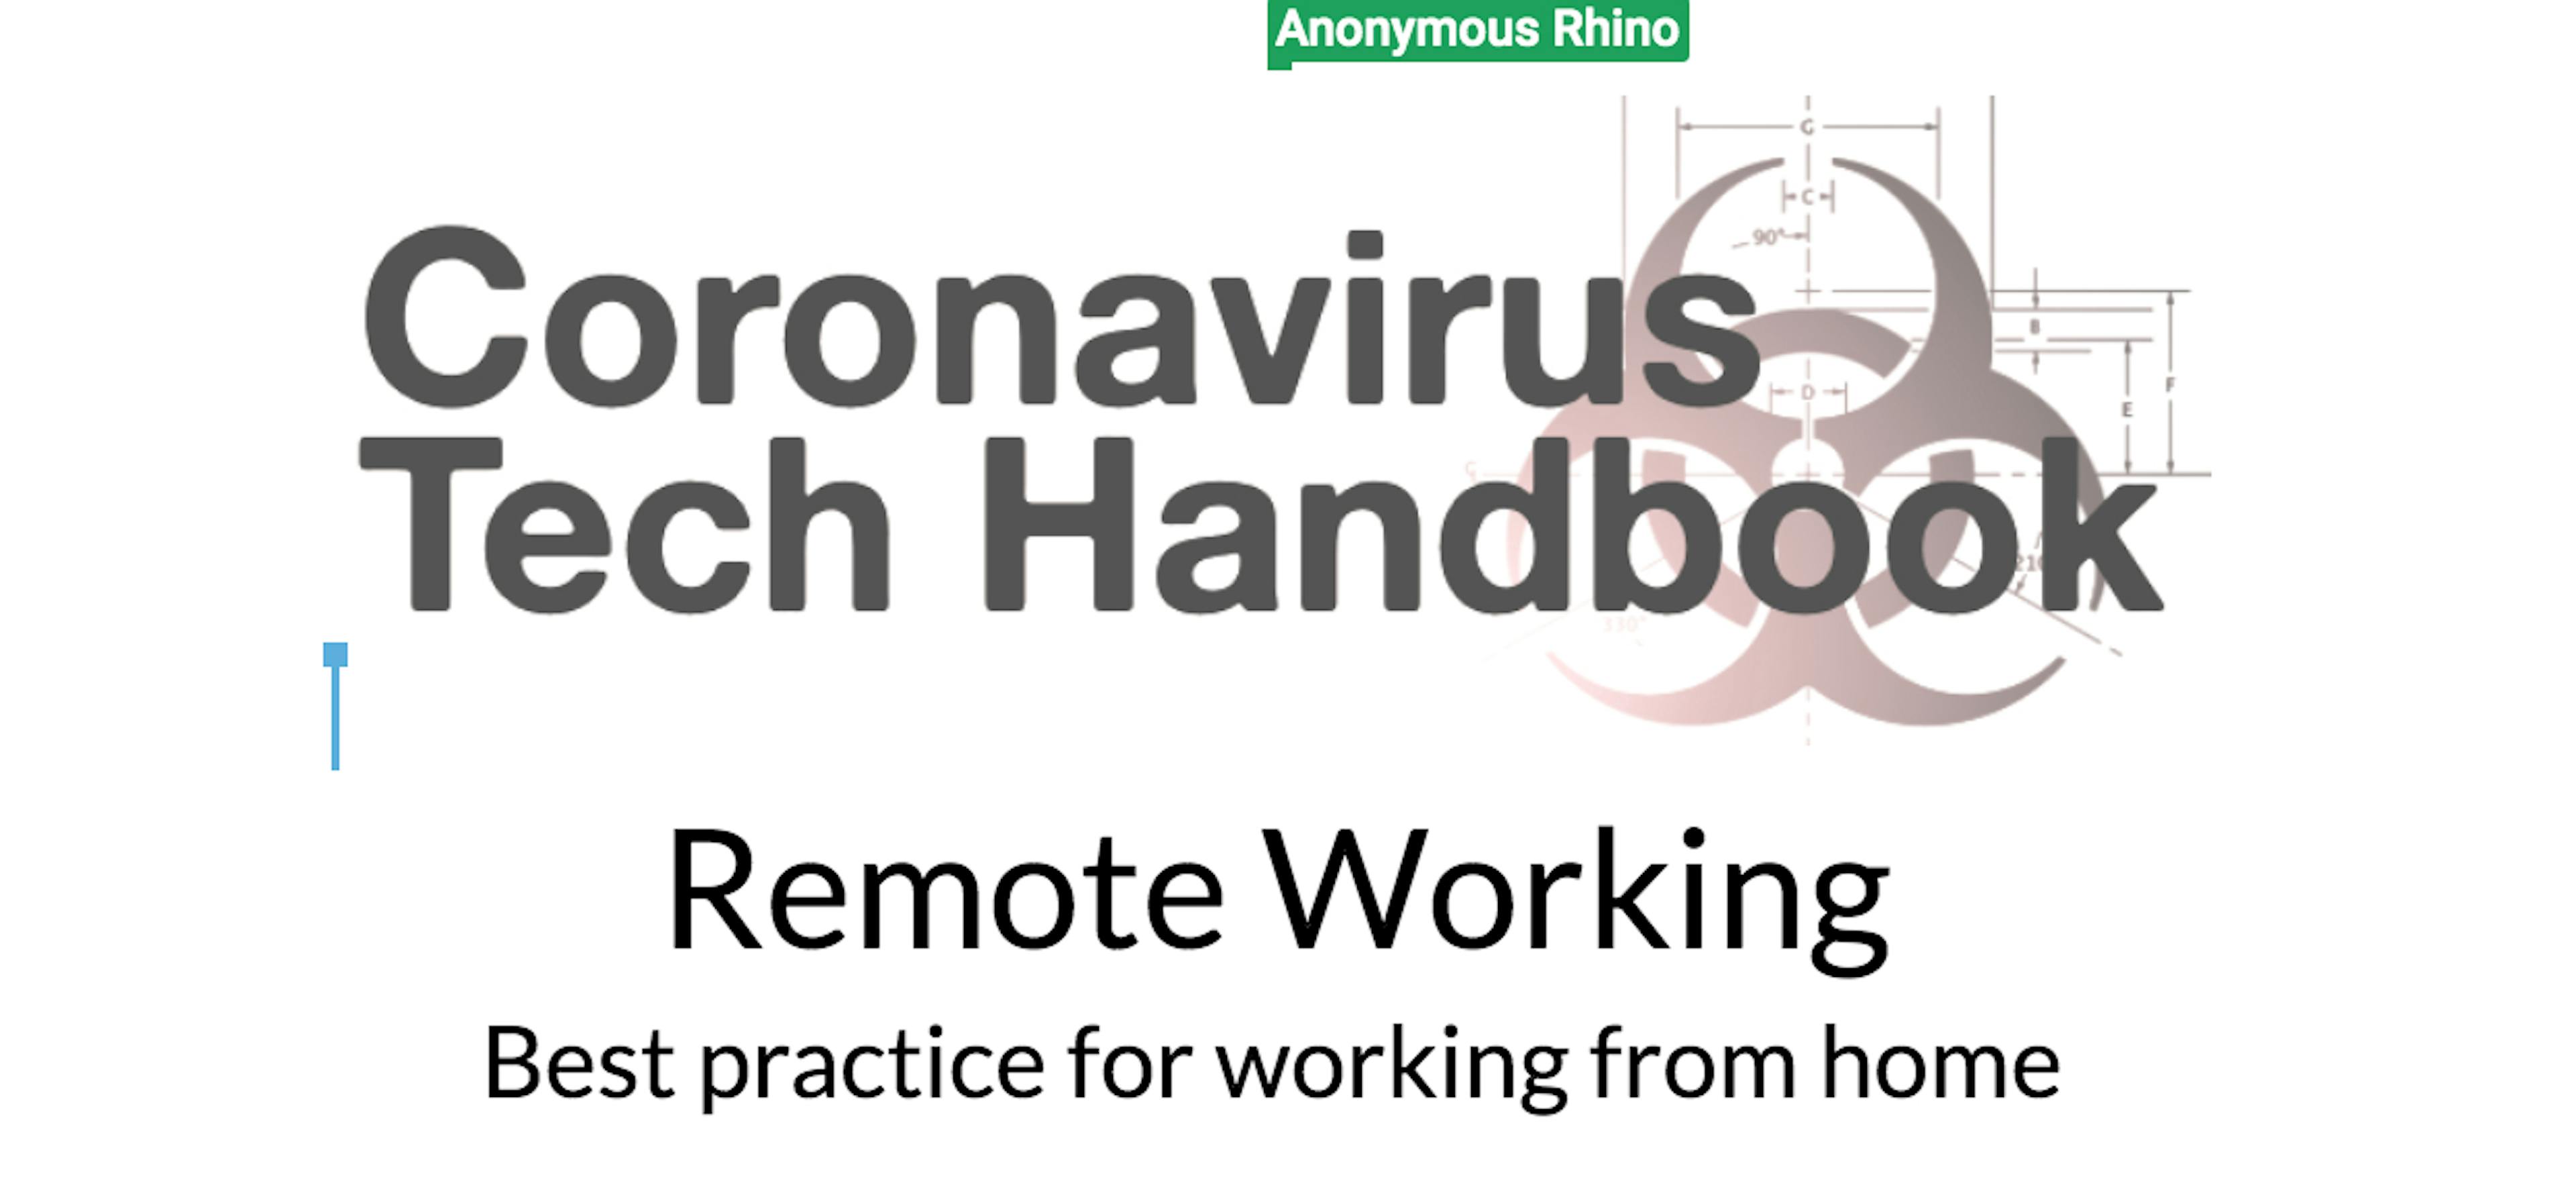 /the-crowdsourced-guide-to-remote-working-in-the-age-of-coronavirus-pp103217 feature image